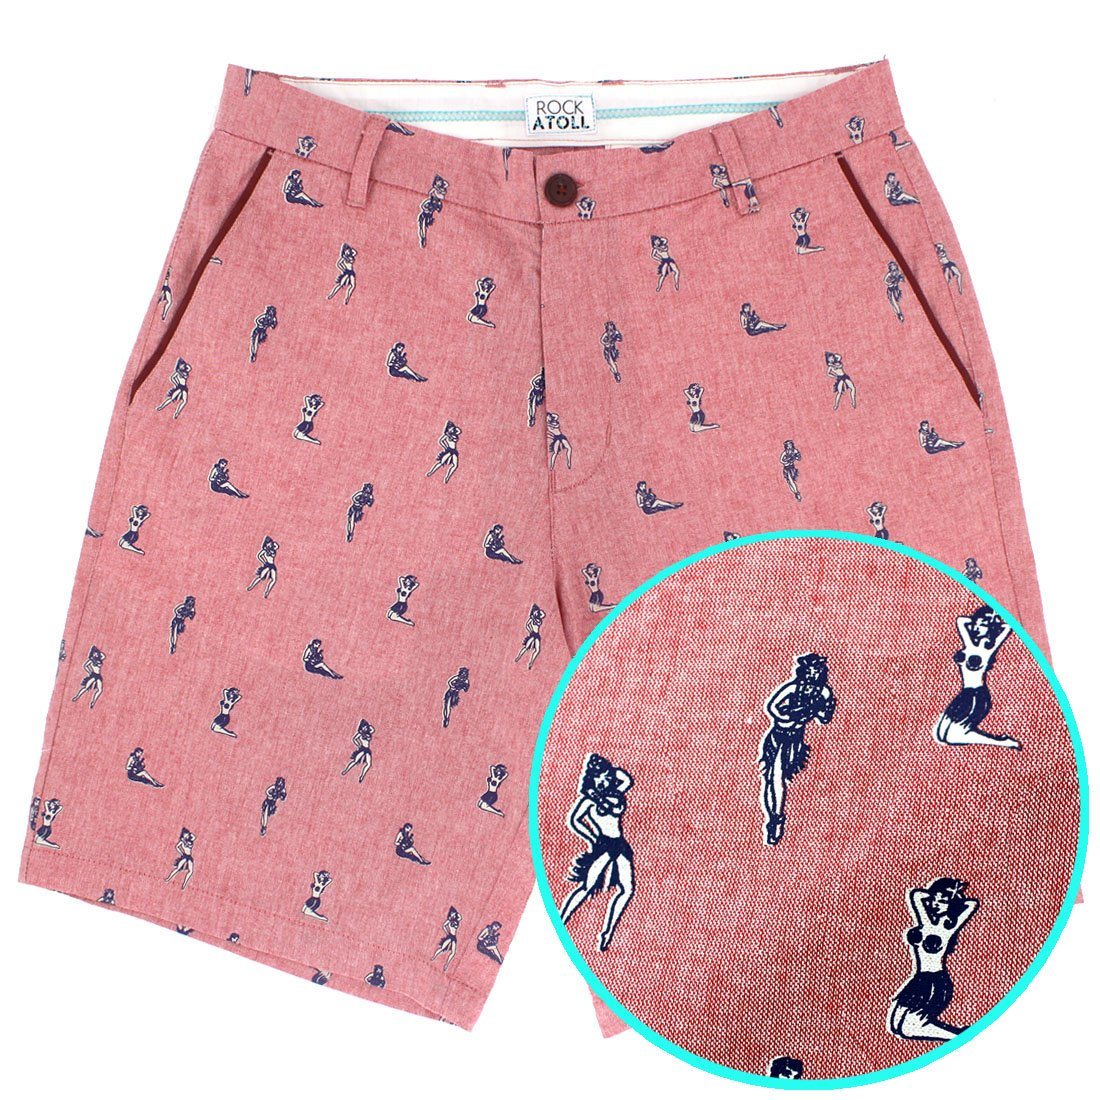 Fun Colorful Patterned Men's Flat Front Chino Shorts in Novelty Prints